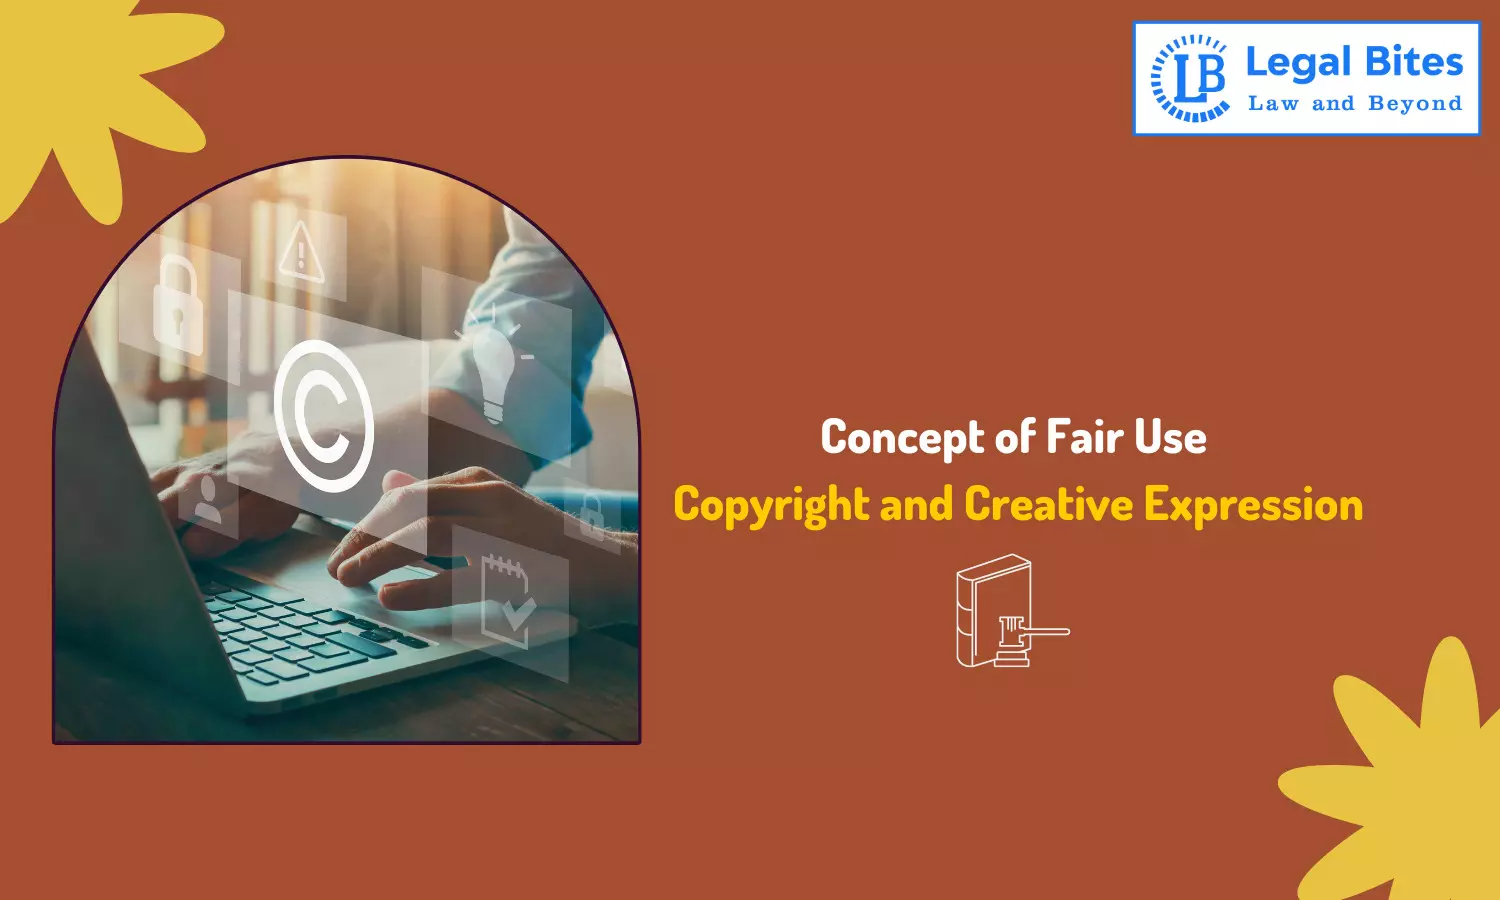 Concept of Fair Use: Copyright and Creative Expression